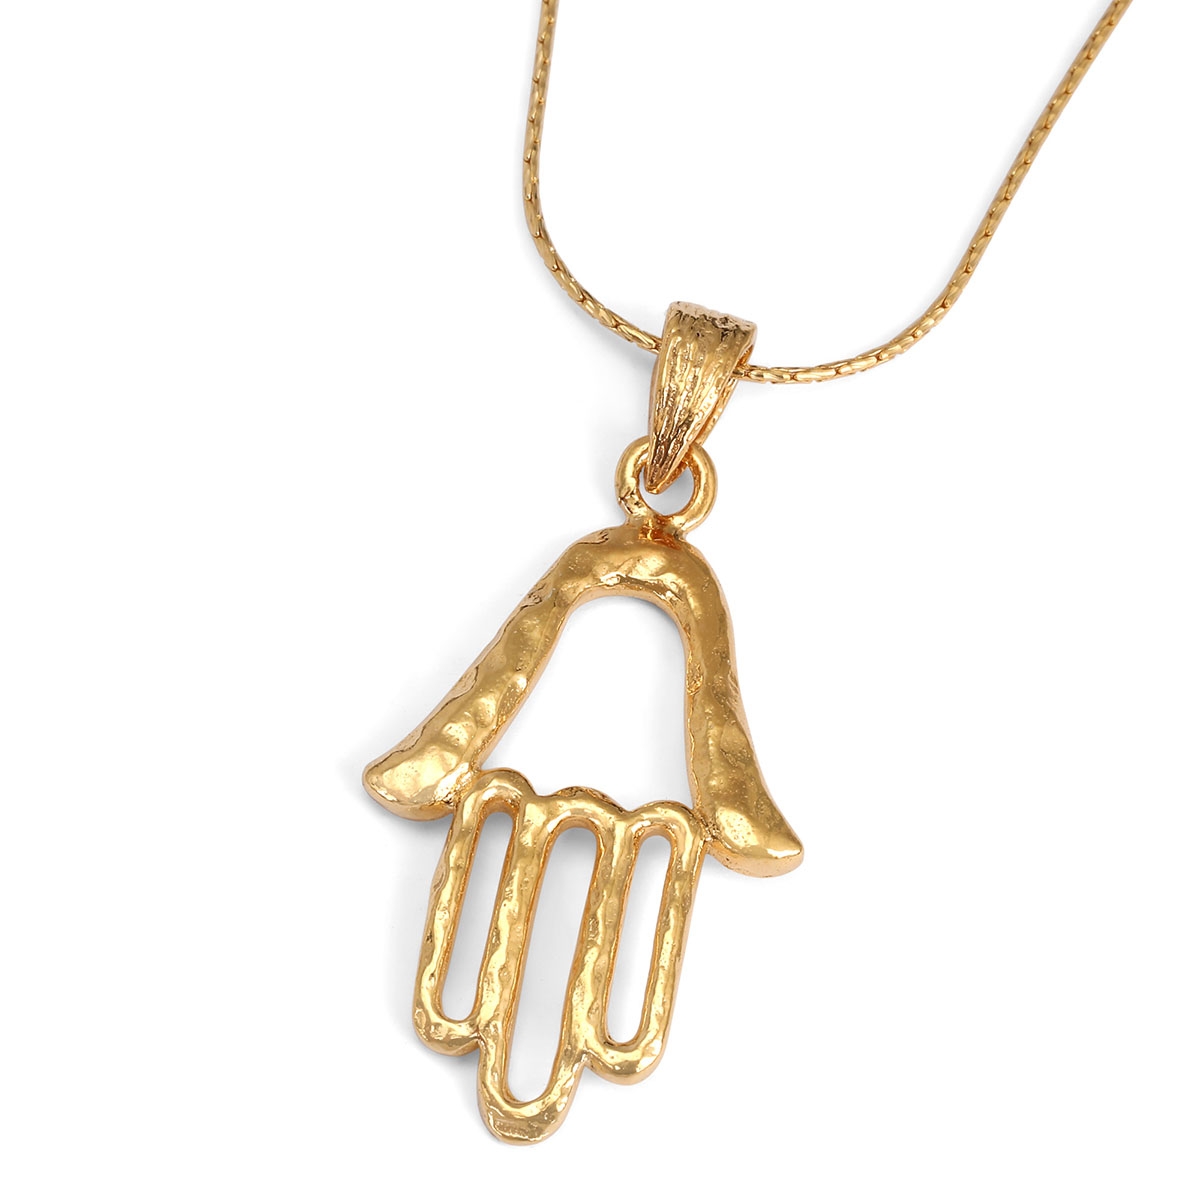 Chic Gold-Plated Hamsa Necklace - 1